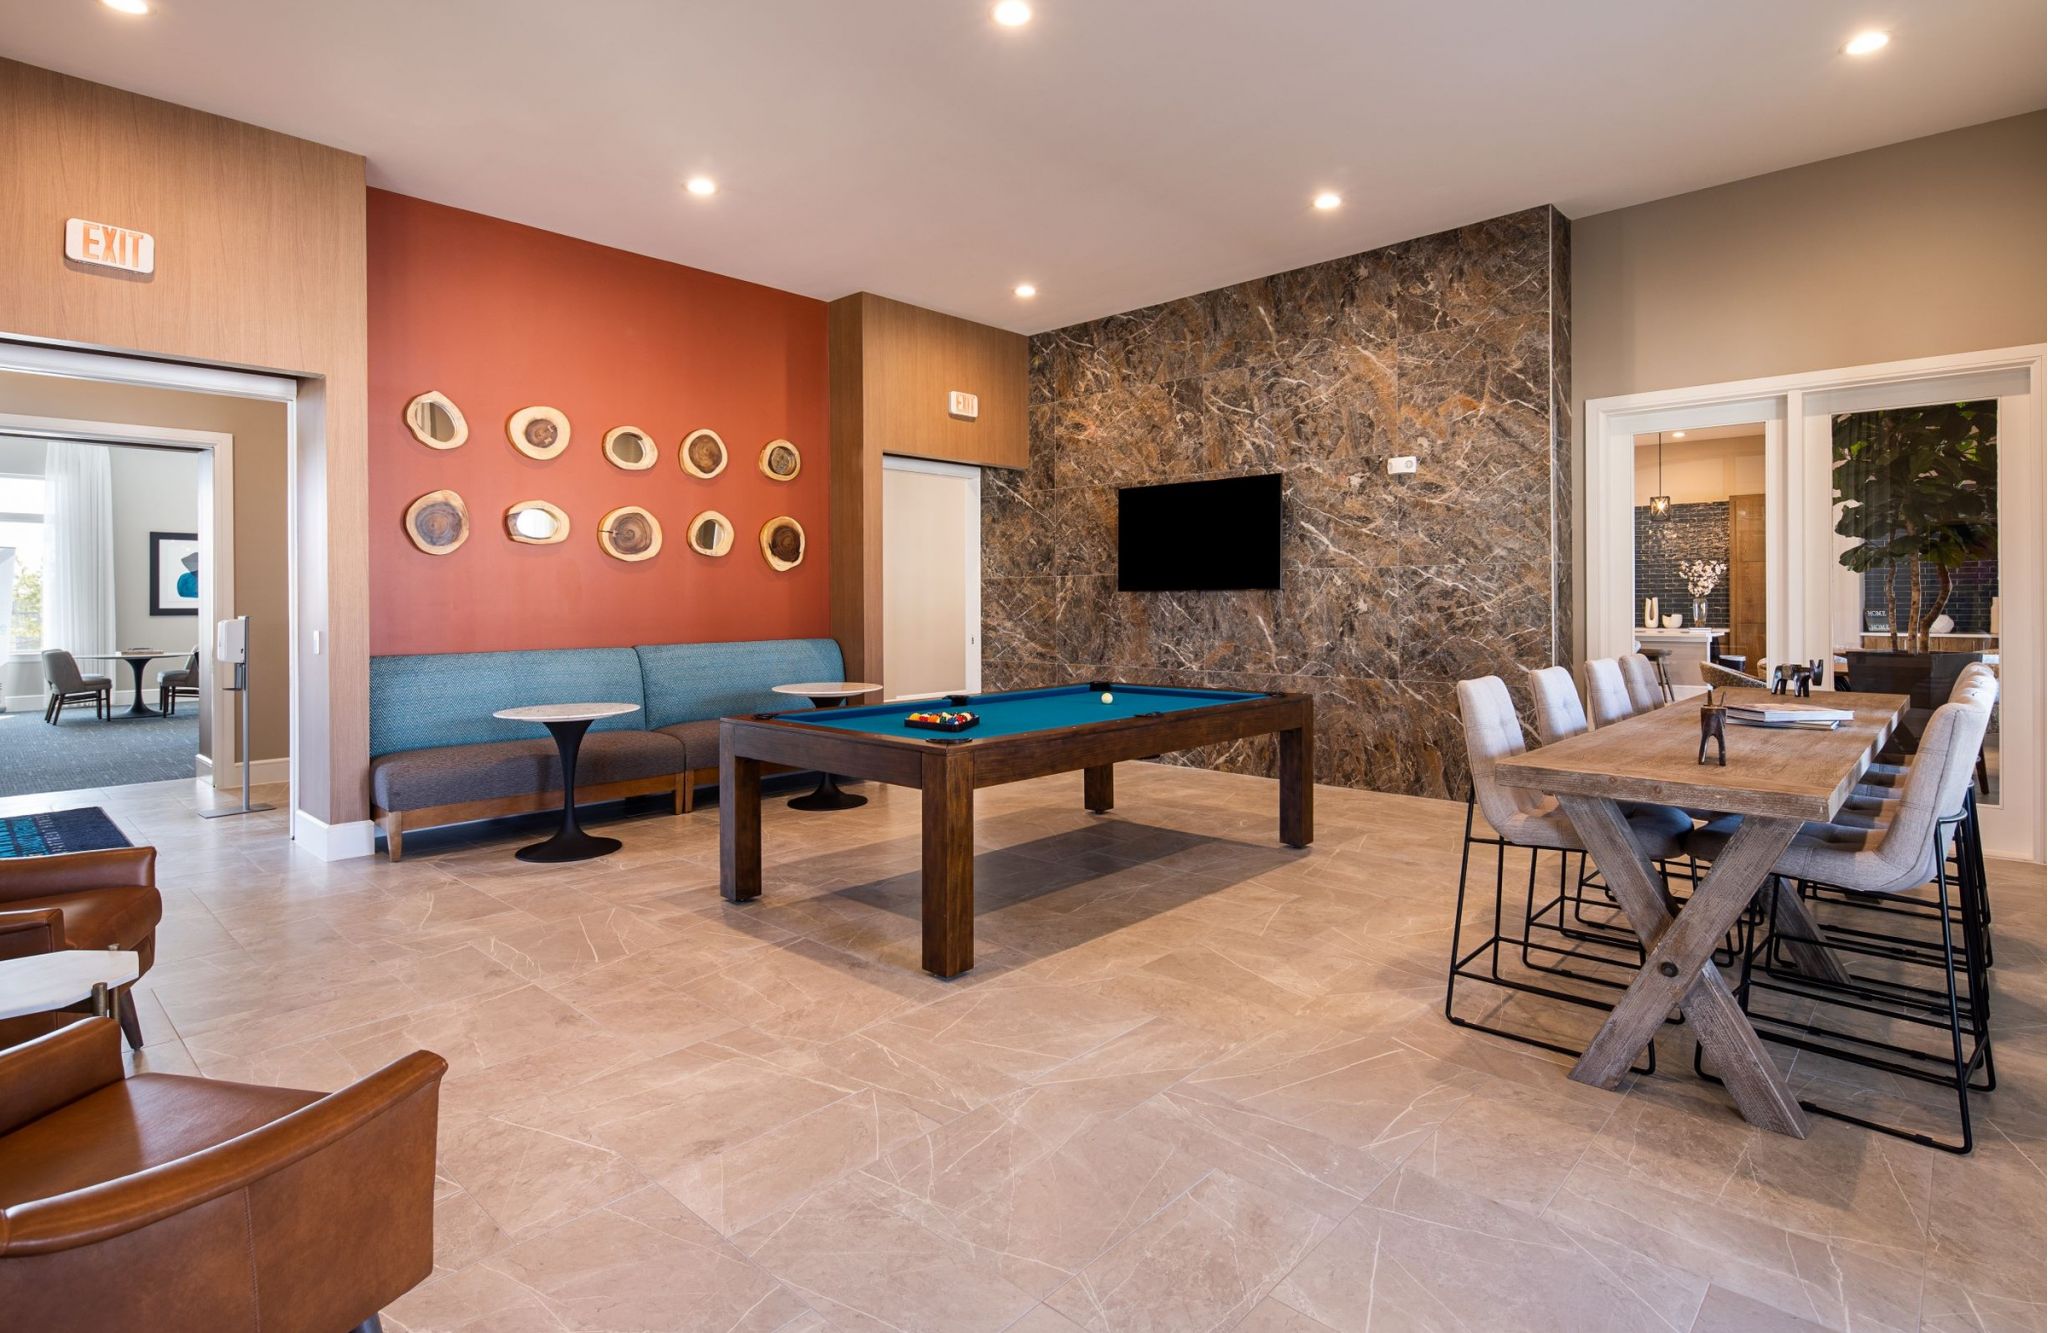 Hawthorne at Blanco Riverwalk sresident clubhouse amenity with seating area, pool table, and beautiful finishes